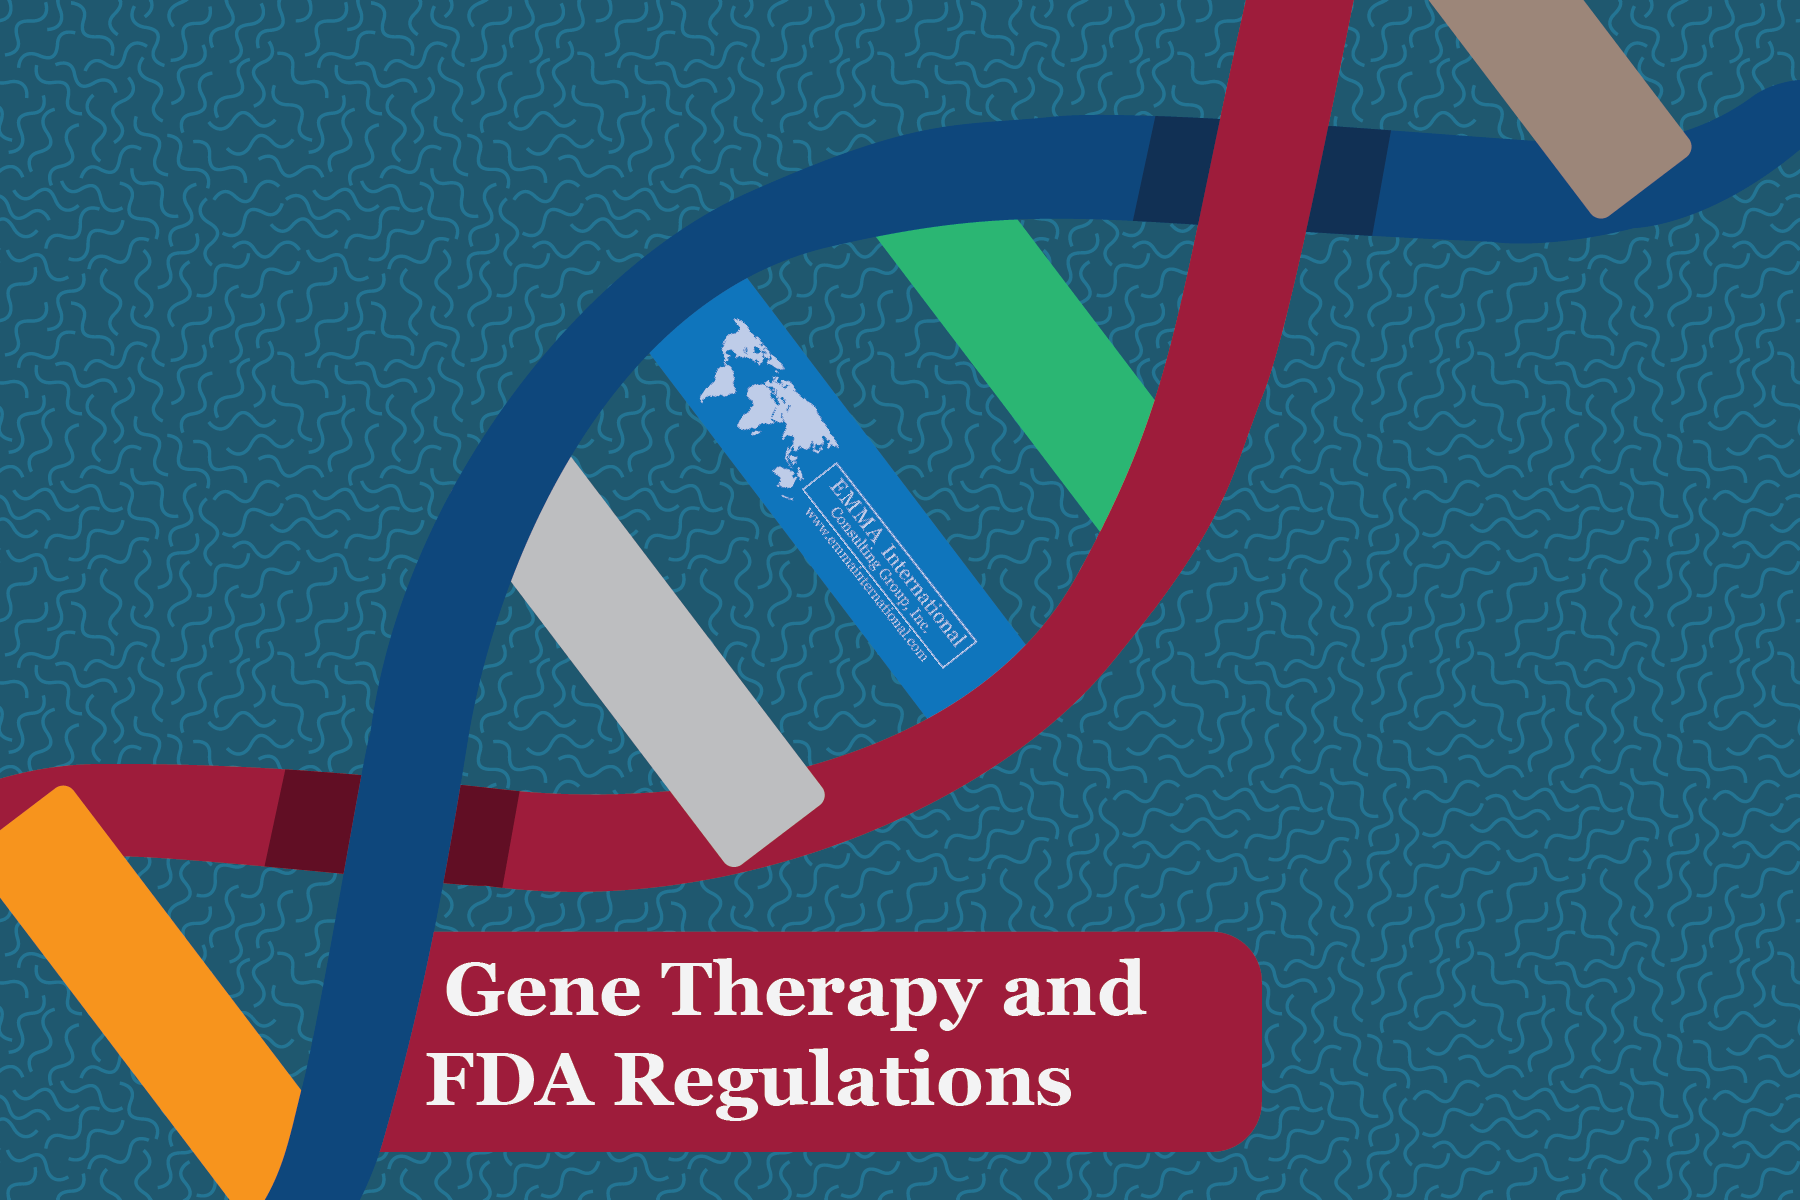 Gene Therapy and FDA Regulations